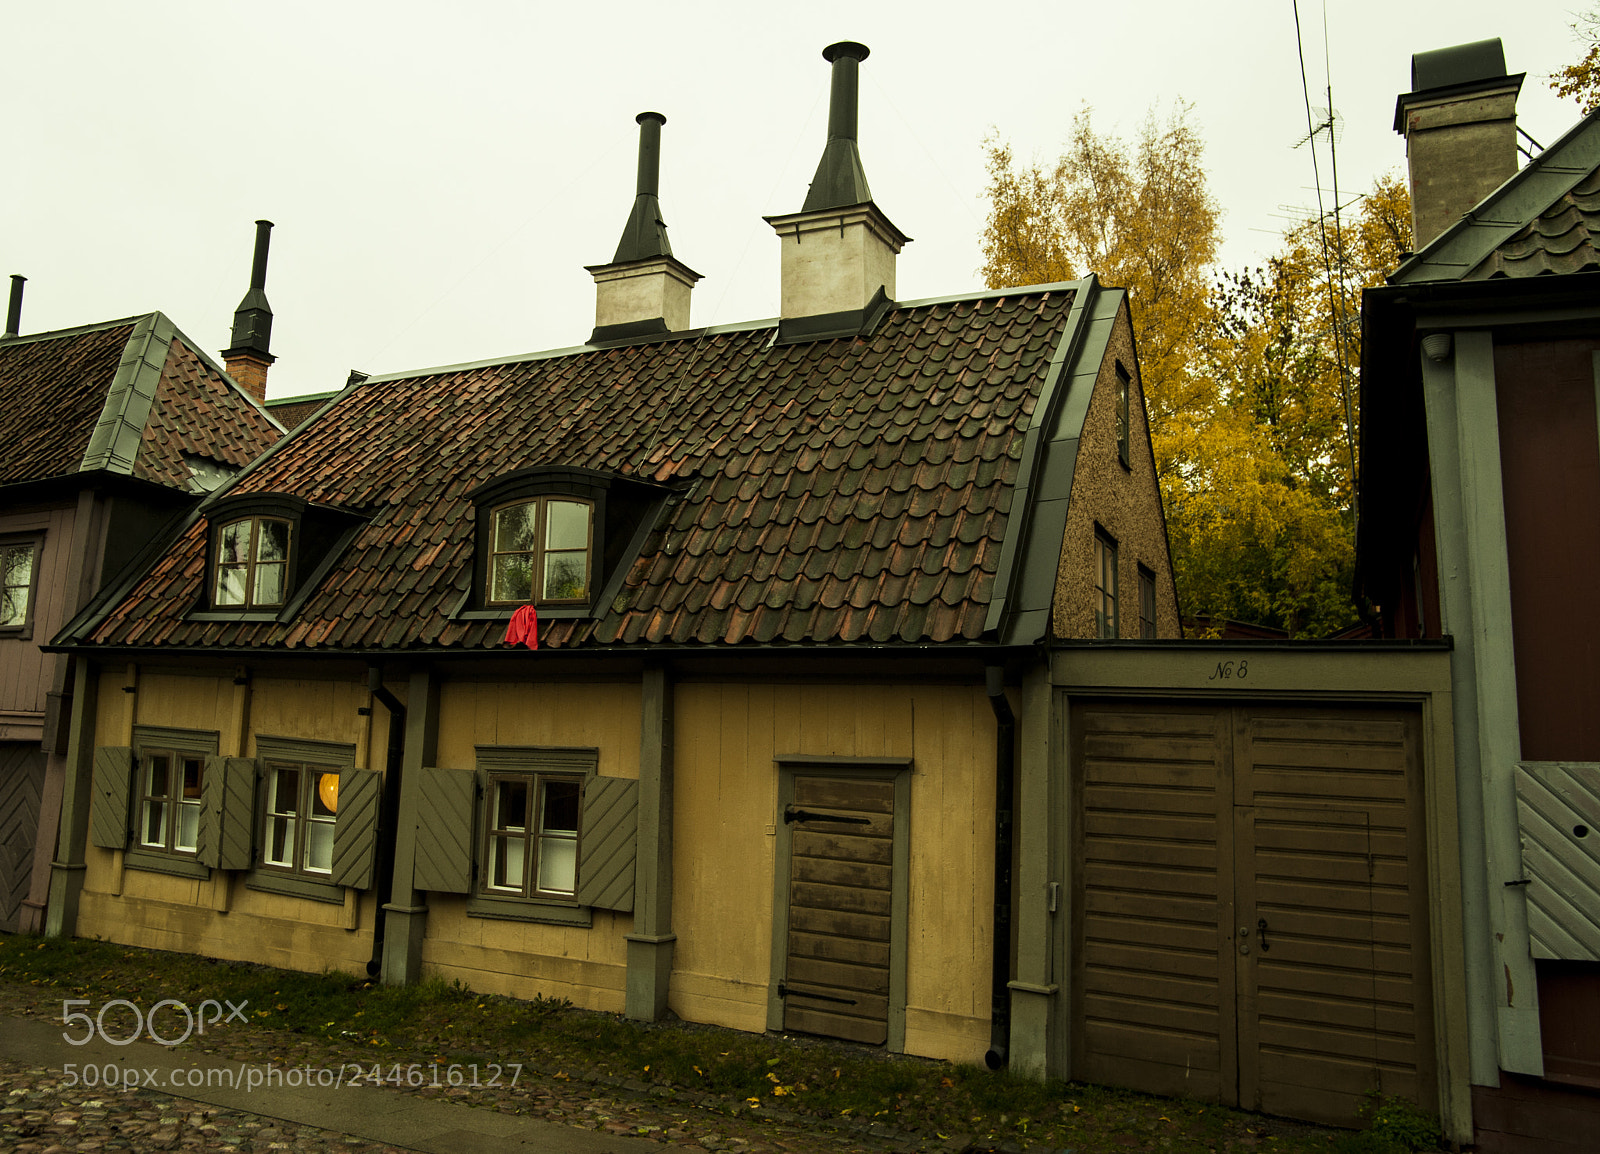 Nikon D700 sample photo. A old house for photography